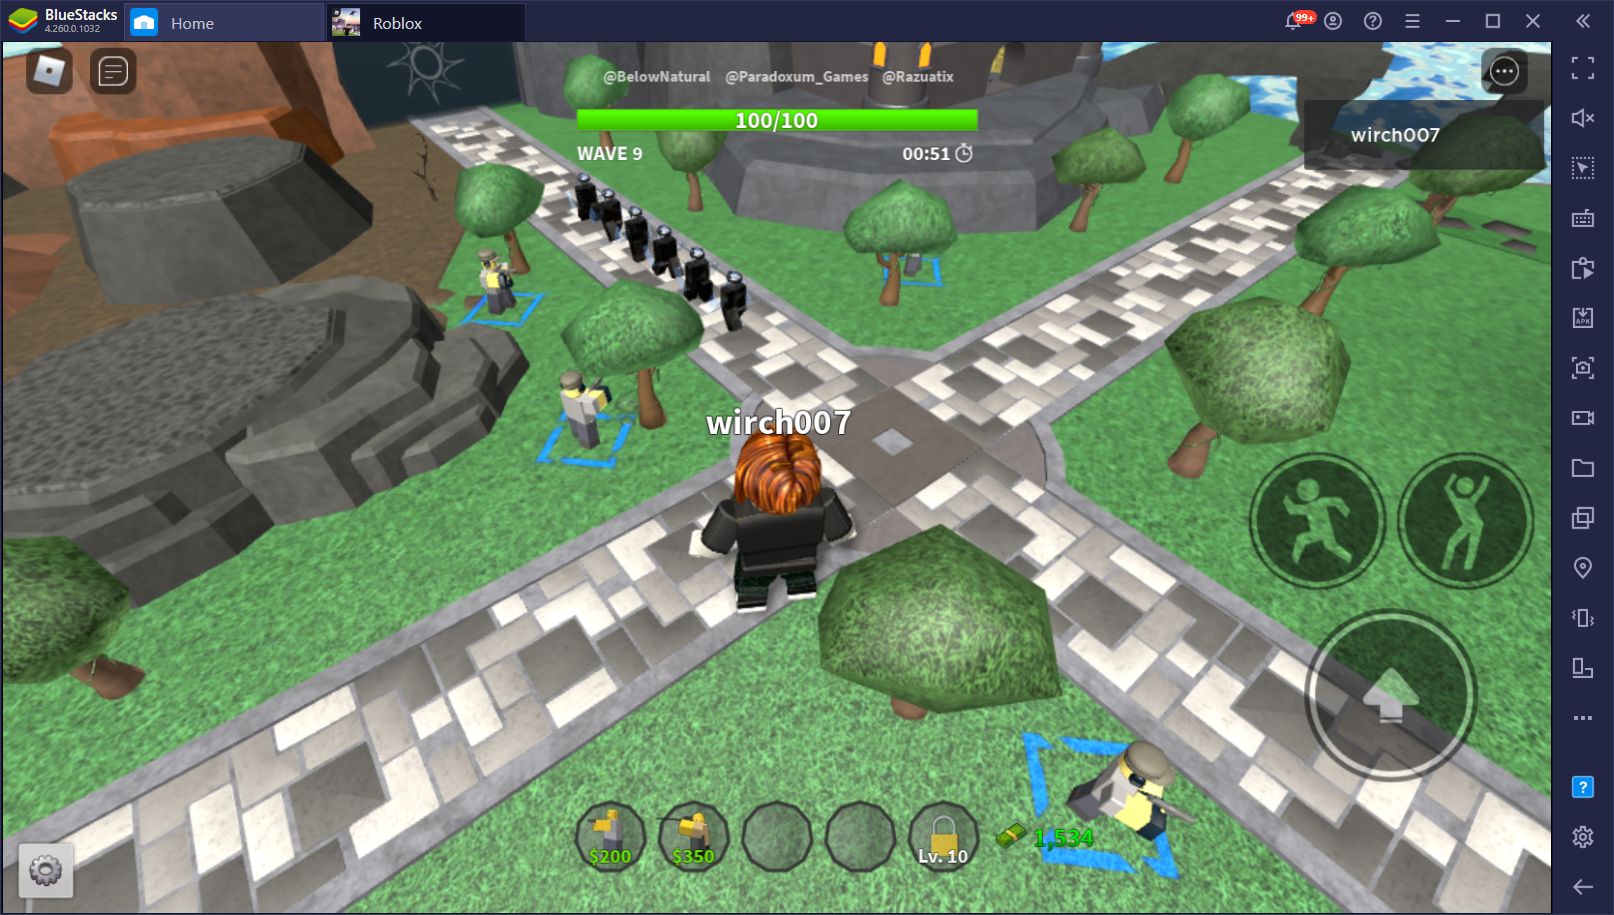 The Best Roblox Games To Play In 2021 Bluestacks - roblox best rpg games list